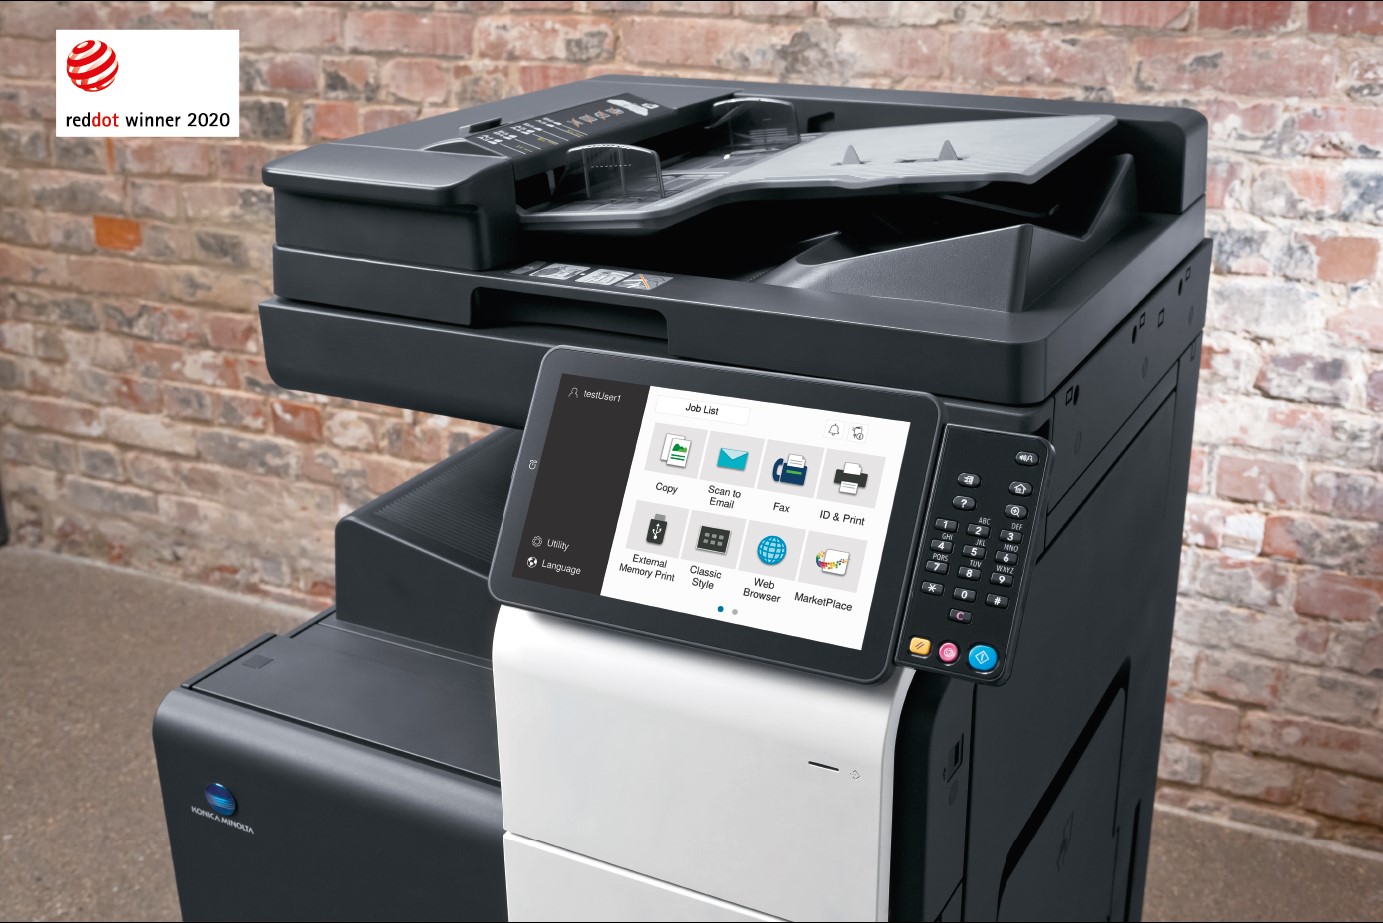 Making Normal Dekoration Konica Minolta launches global cloud printing service - The Recycler -  23/07/2020